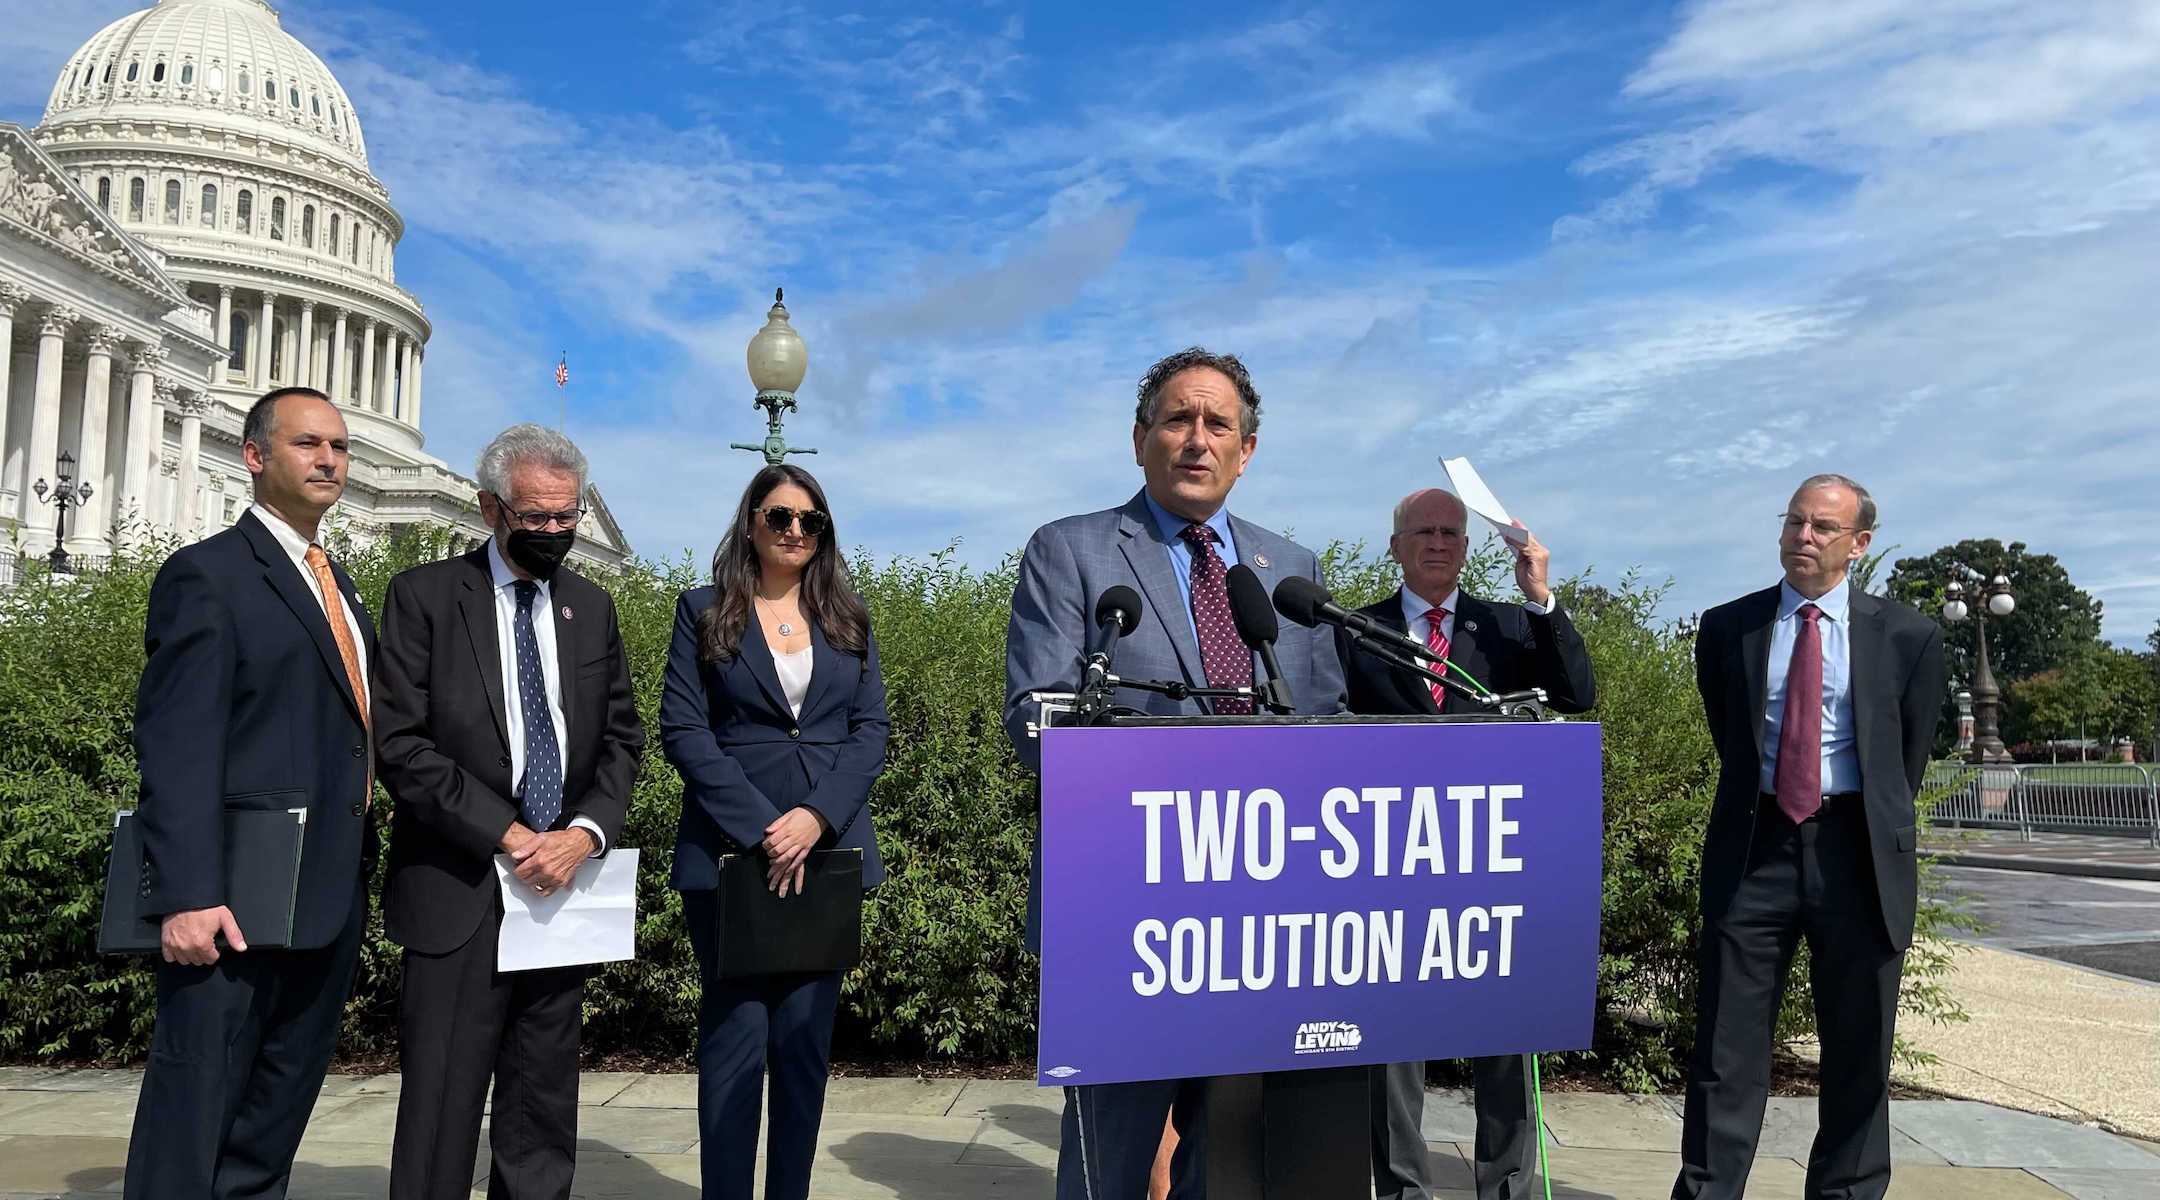 Rep. Andy Levin speaks at a press conference introducing his “Two-State Solution Act” on Capitol Hill, Sept. 23, 2021. He is flanked by, from left: Hadar Susskind, the president and CEO of Americans for Peace Now; Rep. Alan Lowenthal; Rep. Sara Jacobs; Rep. Peter Welch; and J Street President Jeremy Ben-Ami. (Ron Kampeas)